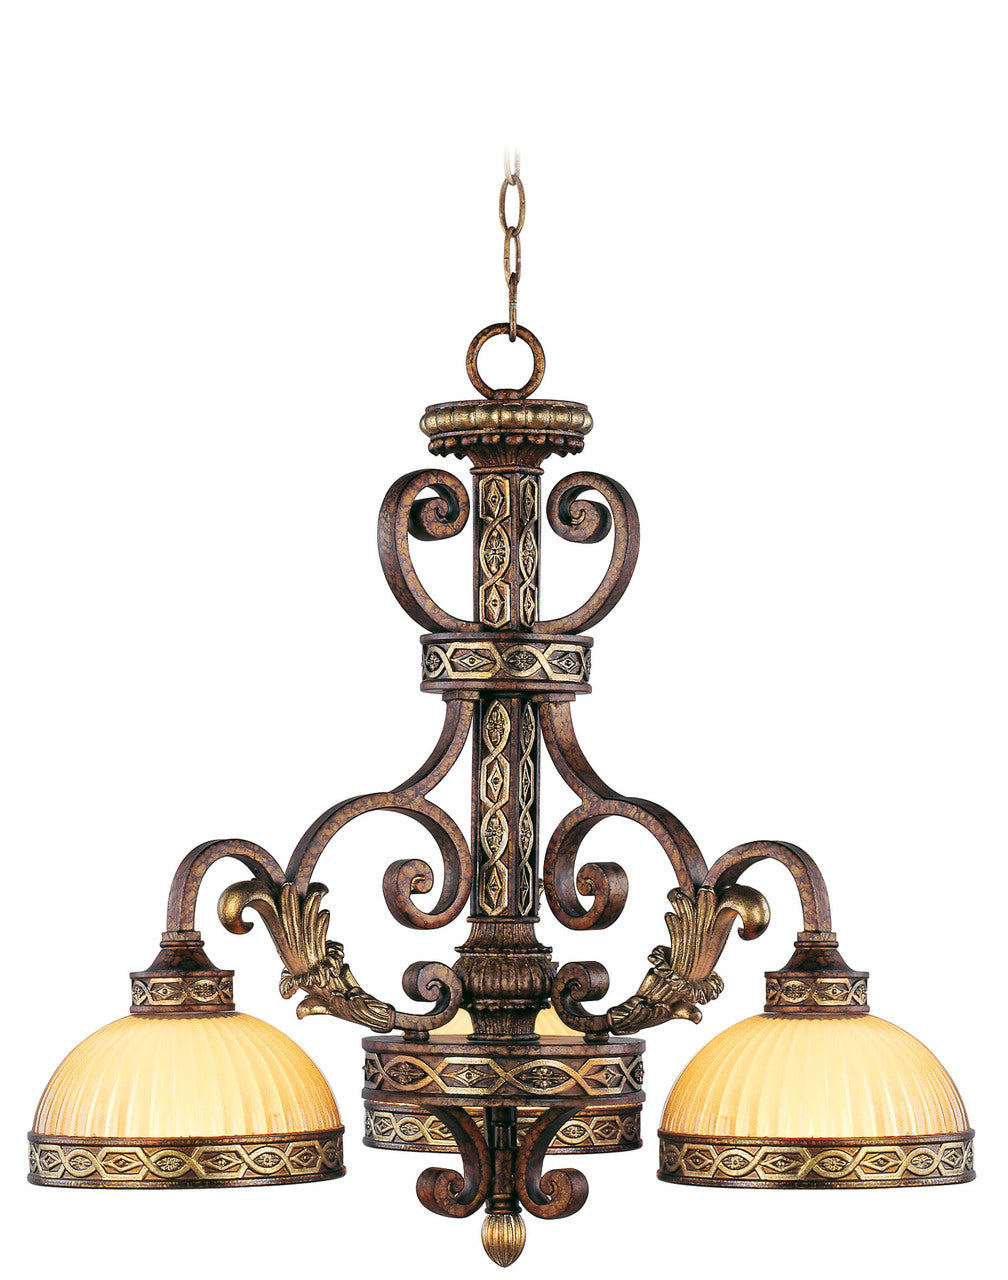 LIVEX Lighting 8523-64 Seville Chandelier in Palacial Bronze with Gilded Accents (3 Light)